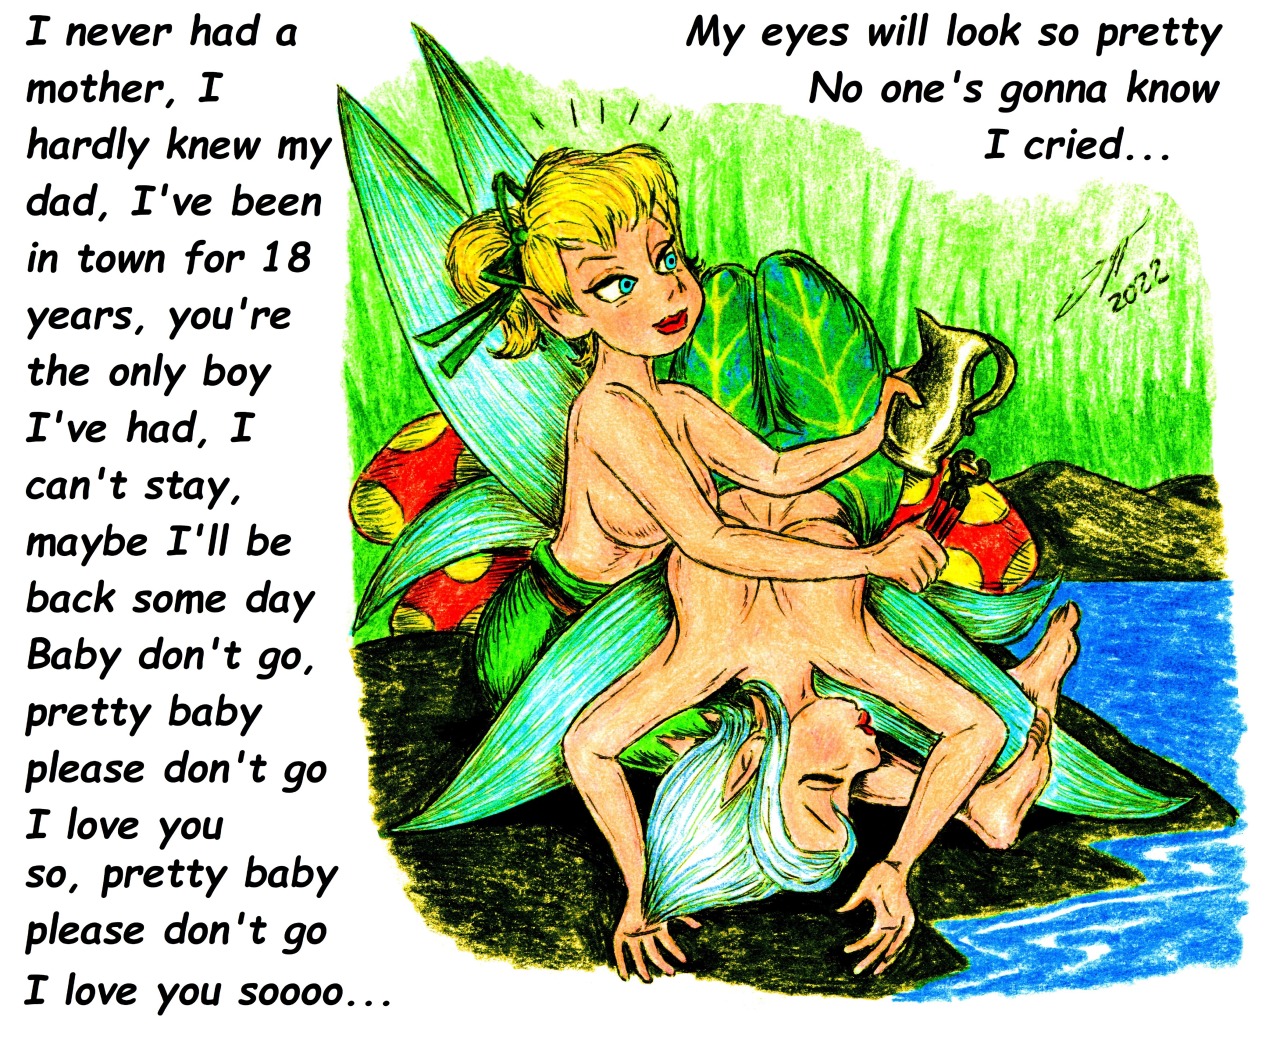 ALWAYS TINKERING AND FIXING THINGS!!Tinkerbell and Periwinkle always visit their secret place there in the pond; They always talk about their intimate things, their dreams and their feelings as sisters who love each other.Periwinkle usually loves to take a nap there, and always loves to rest on Tinks lap, soon falling asleep. But Tinkerbell is a TINKER FAIRY, and as a fairy saying goes: A Tinker Fairy is always thinking about what to fix; so its very usual to see that while Peri is sleeping soundly, Tink takes out her tools and starts to fix some artifact that needs fixing.Tink is very skilled at fixing things, she is always careful NOT TO HURT her sister while doing her repairs, so Peri can continue taking her nap.Lyrics from the song “Baby Don’t Go” by Sonny & Cher. #periwinkle fairy#periwinkle#Tinkerbell#Tinkerbell Fairy#tinkerbell disney#tinkerbell fanart #tink & periwinkle #fairies twins#tinkerbell sister#tinker talent#winter fairy #the secret of wings #sisters love#Disney Fairies #disney fairies books  #disney fairies fan art  #disney fairies art #fairies art#fairies#cute fairies#beautiful fairies#Lovely fairies#adorable fairies#pretty fairies#Pixie Hollow #pixie hollow art